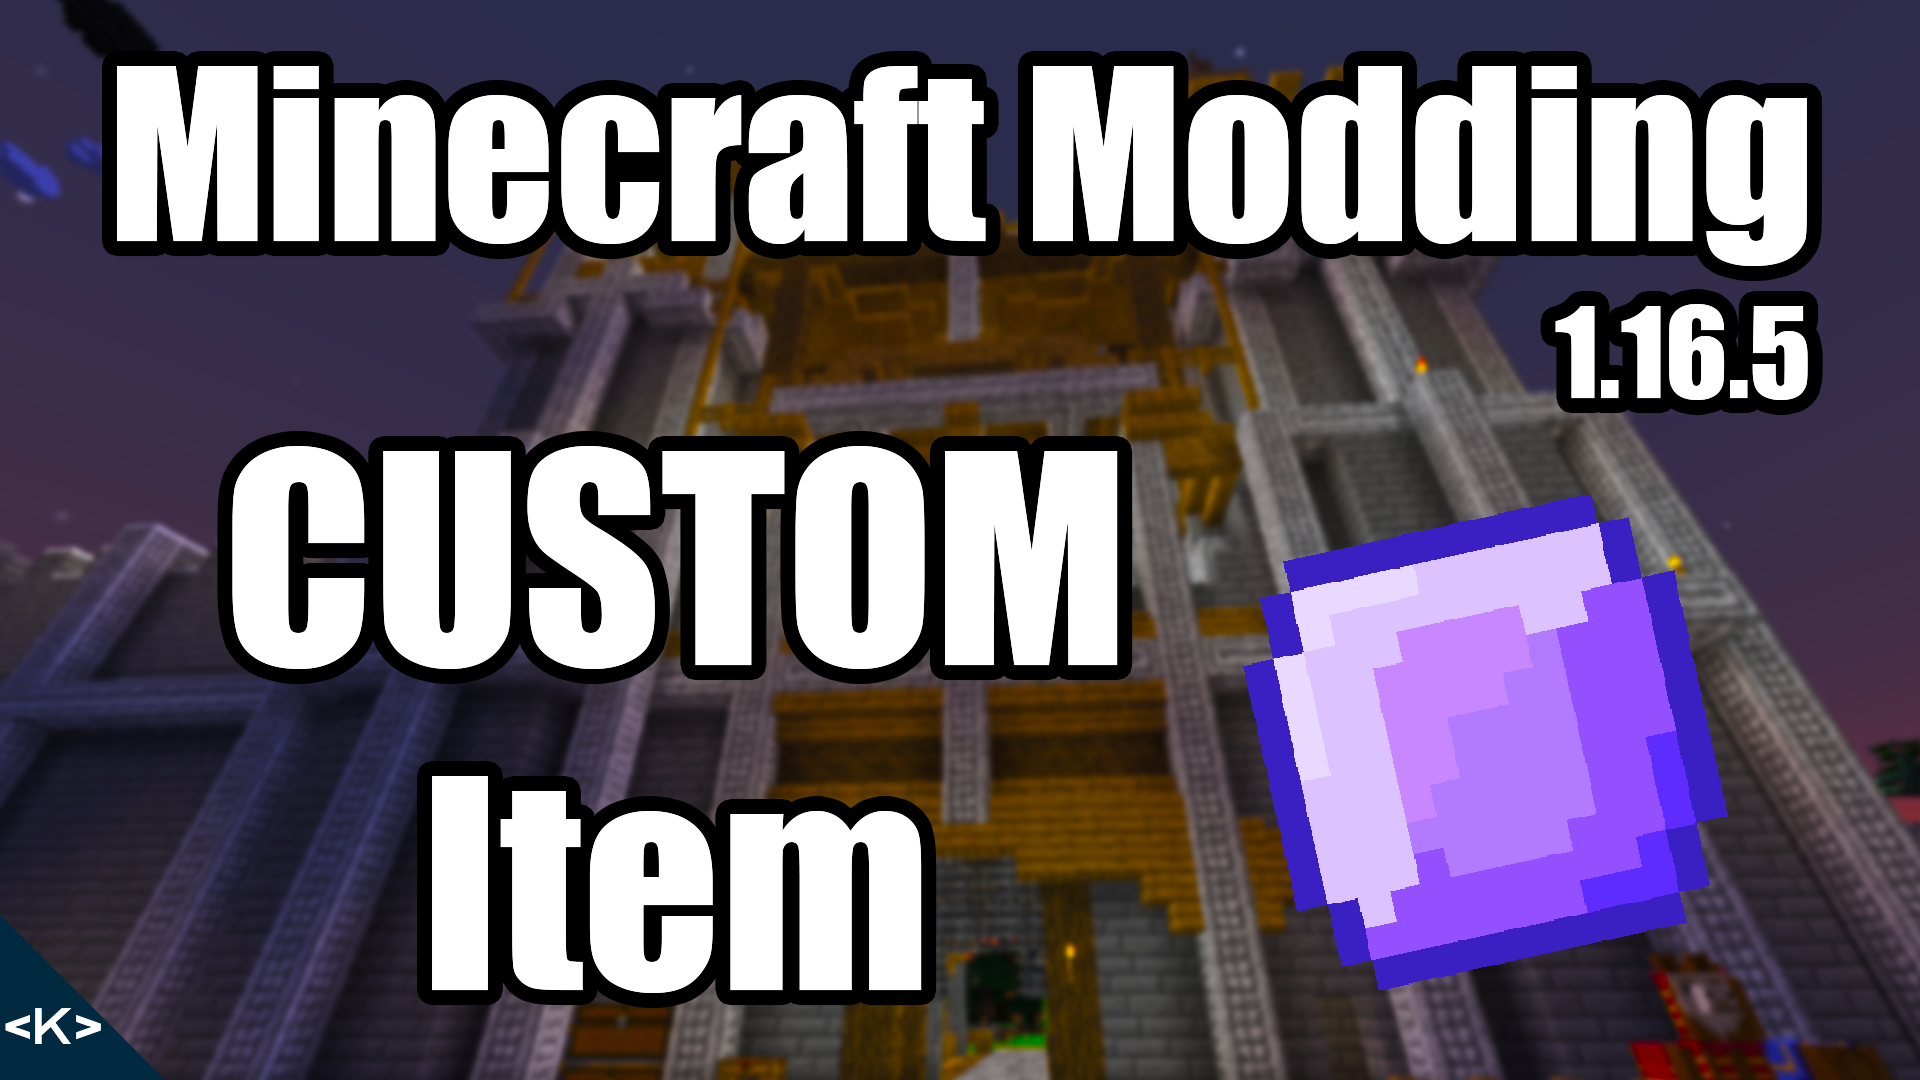 CUSTOM ITEM inside of Minecraft with Forge